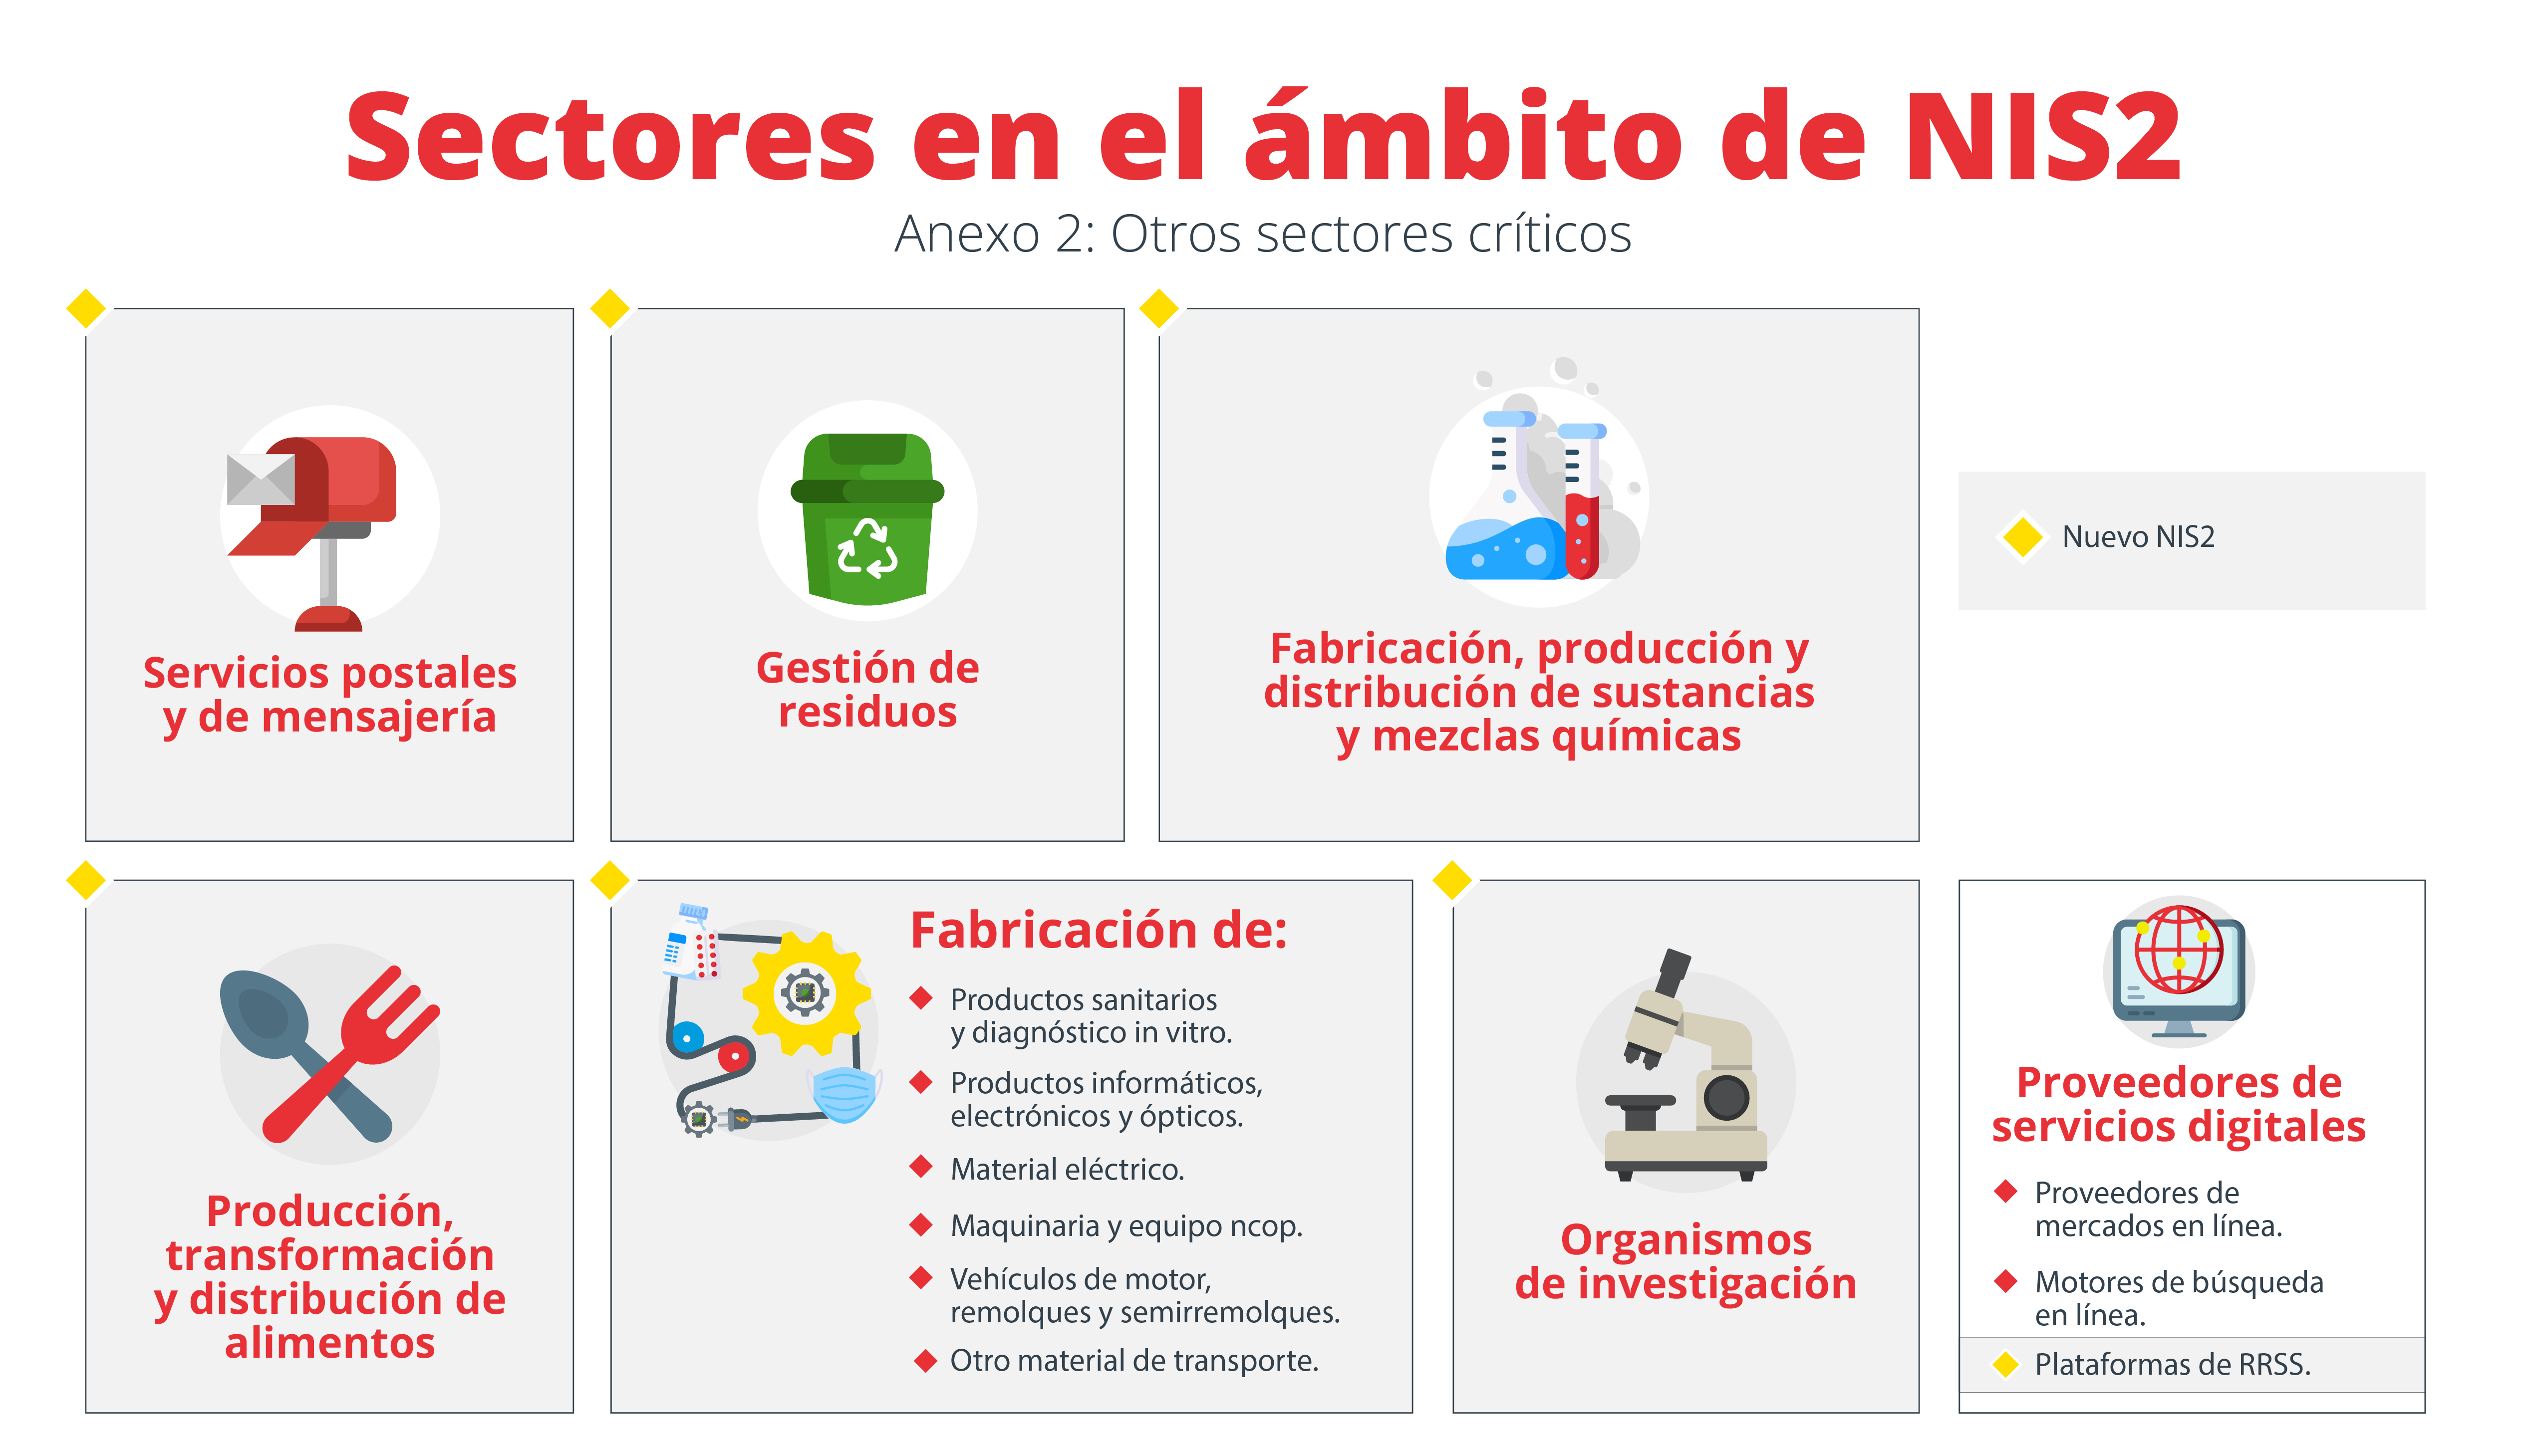 Sectores y subsectores anexo 2 Directiva NIS2